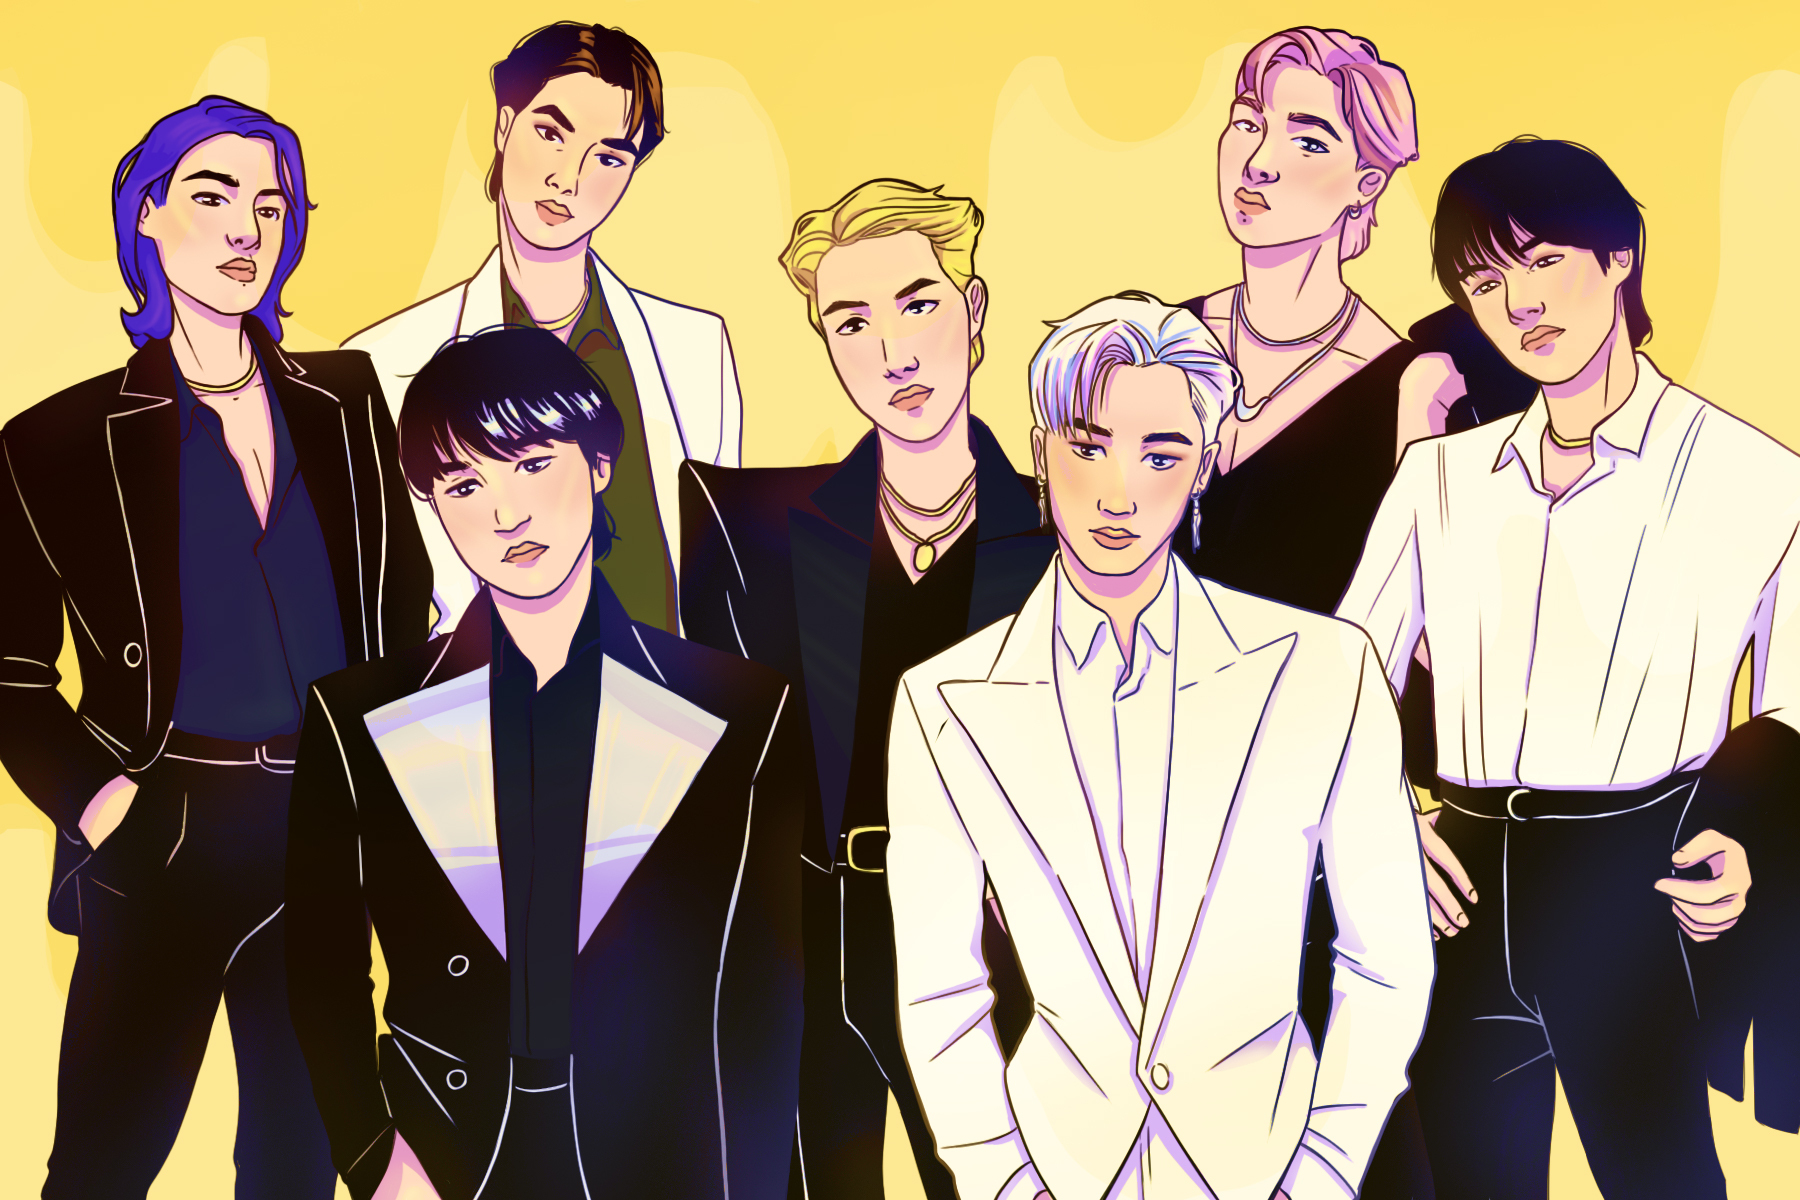 In an article about single Butter, an illustration of BTS